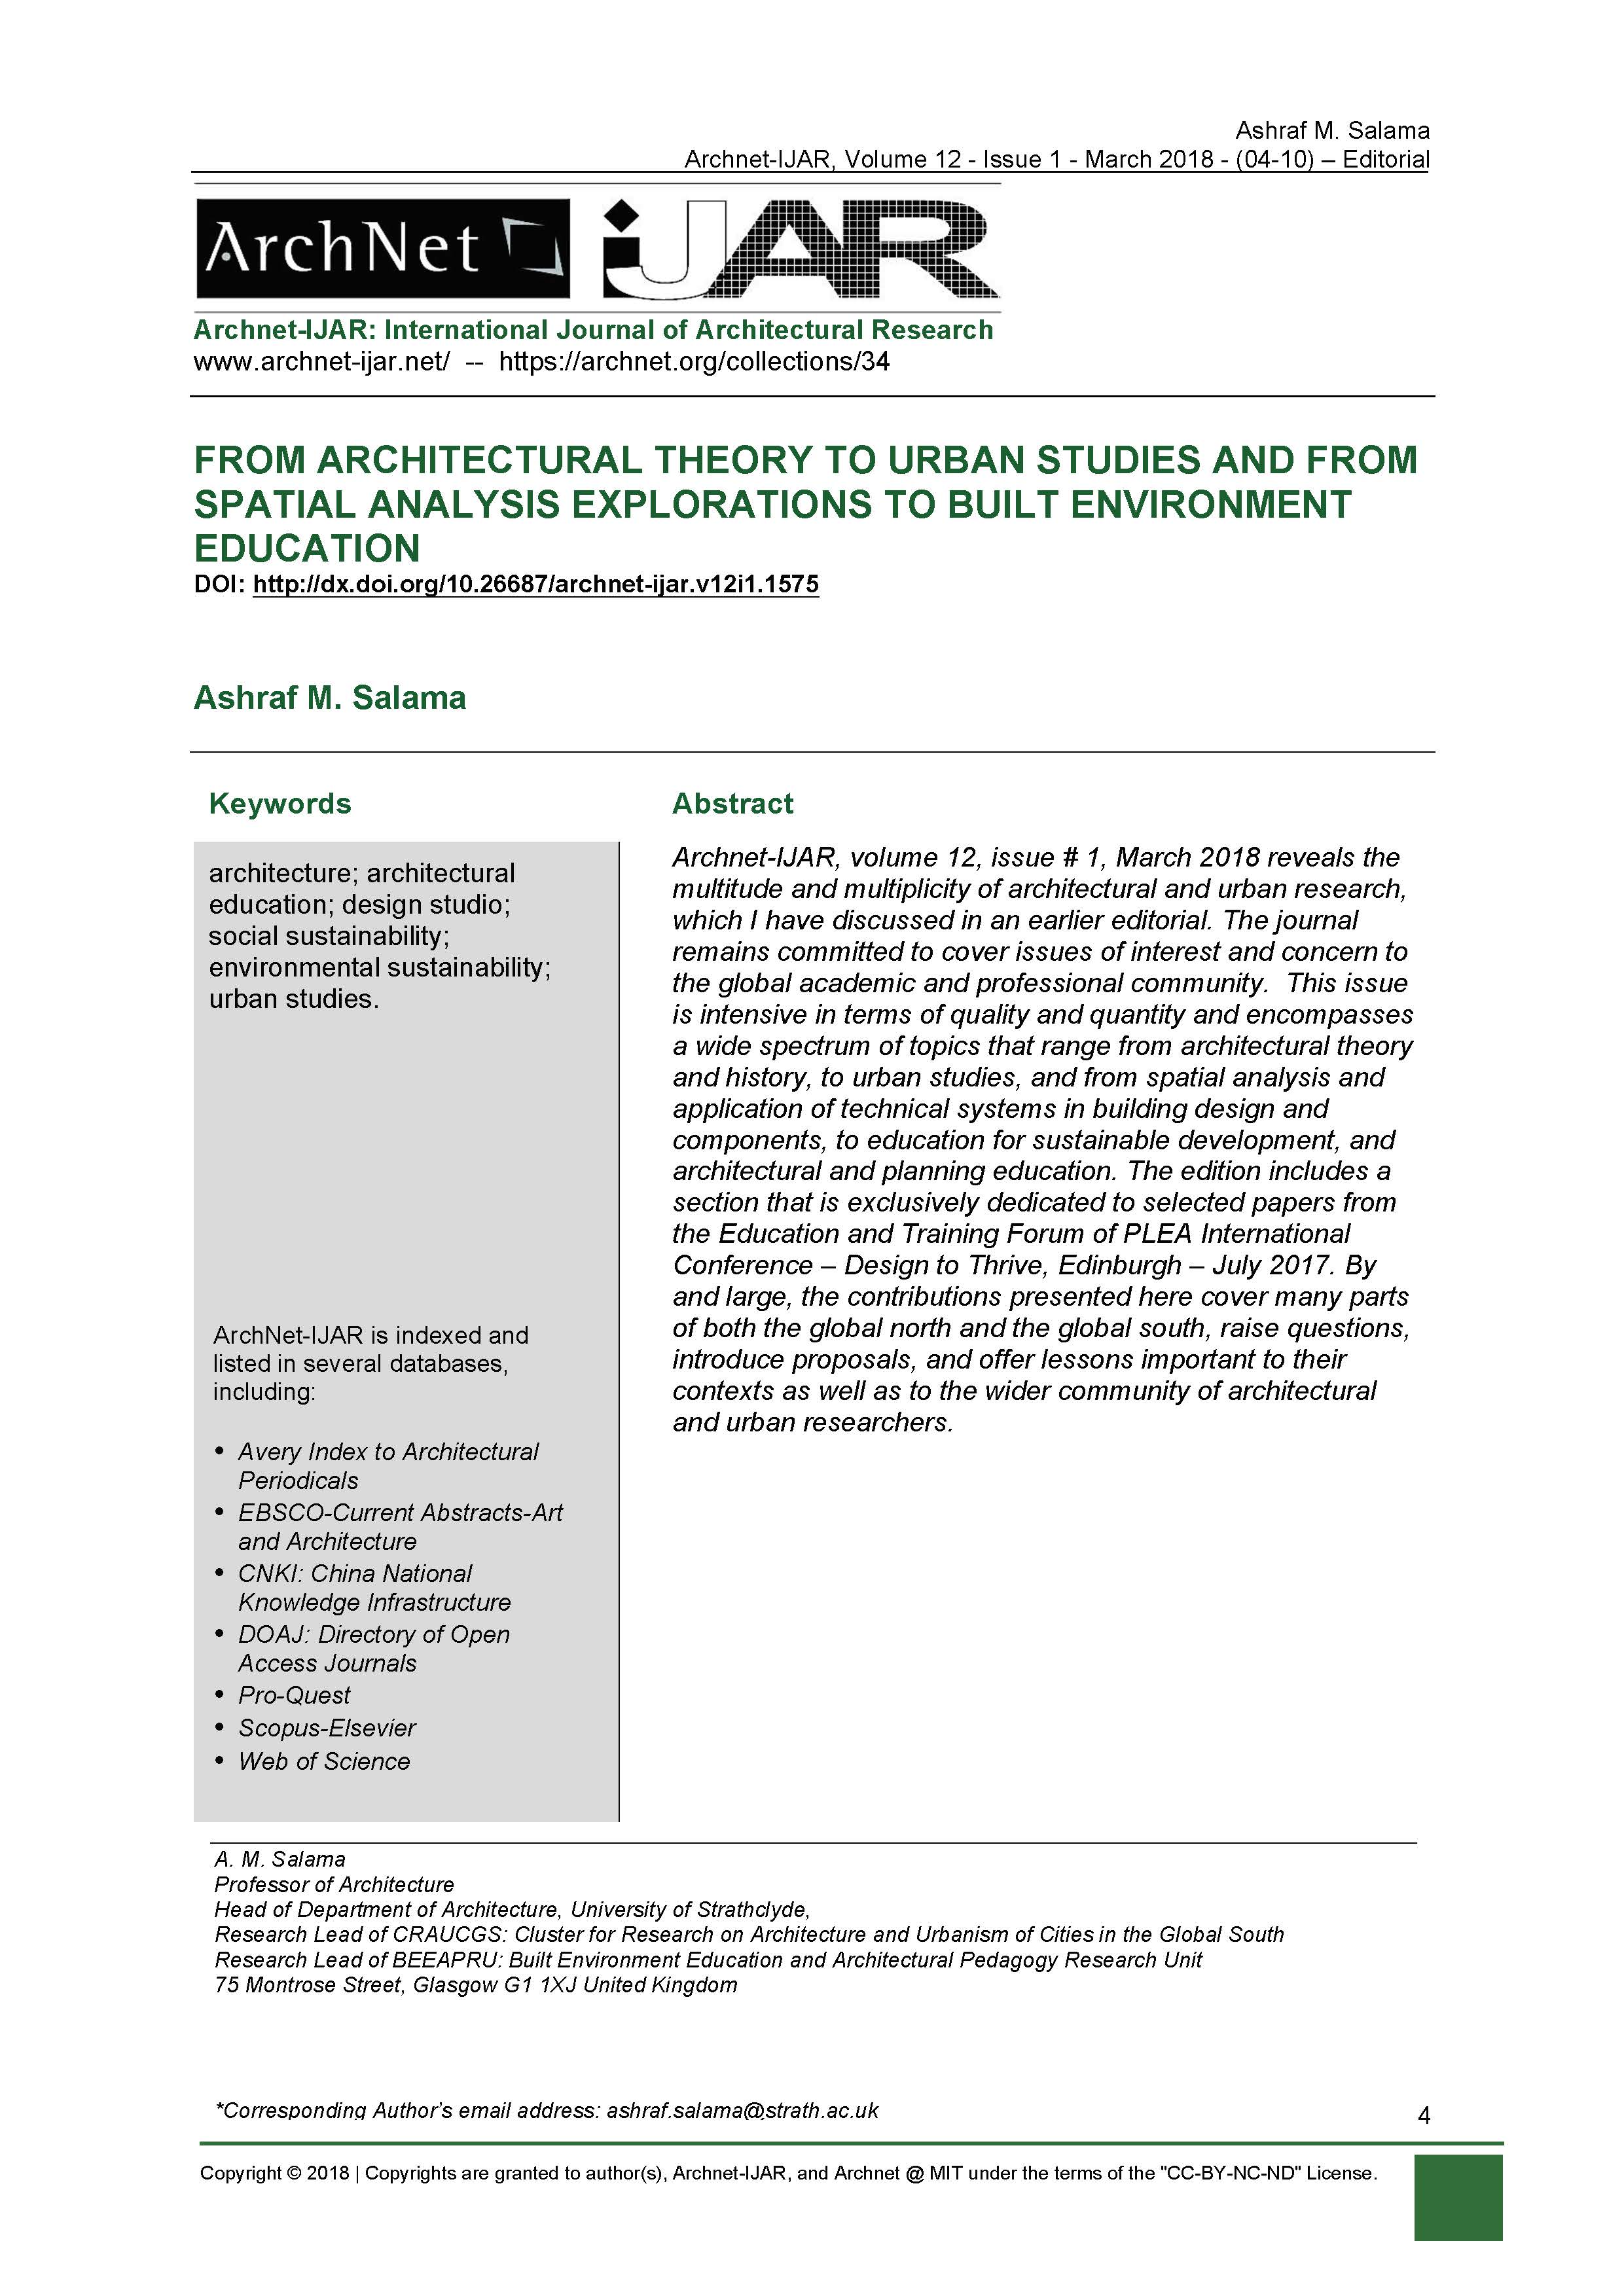 Ashraf Salama - <div style="text-align: justify;"><span style="color: rgb(1, 1, 1);">Archnet-IJAR, volume 12, issue 1 reveals the multitude and multiplicity of architectural and urban research, which I have discussed in an earlier editorial. The journal remains committed to cover issues of interest and concern to the global academic and professional community.&nbsp; This issue is intensive in terms of quality and quantity and encompasses a wide spectrum of topics that range from architectural theory and history, to urban studies, and from spatial analysis and application of technical systems in building design and components, to education for sustainable development, and architectural and planning education. The edition includes a section that is exclusively dedicated to selected papers from the Education and Training Forum of PLEA International Conference – Design to Thrive, Edinburgh – July 2017. By and large, the contributions presented here cover many parts of both the global north and the global south, raise questions, introduce proposals, and offer lessons important to their contexts as well as to the wider community of architectural and urban researchers.</span><br></div>